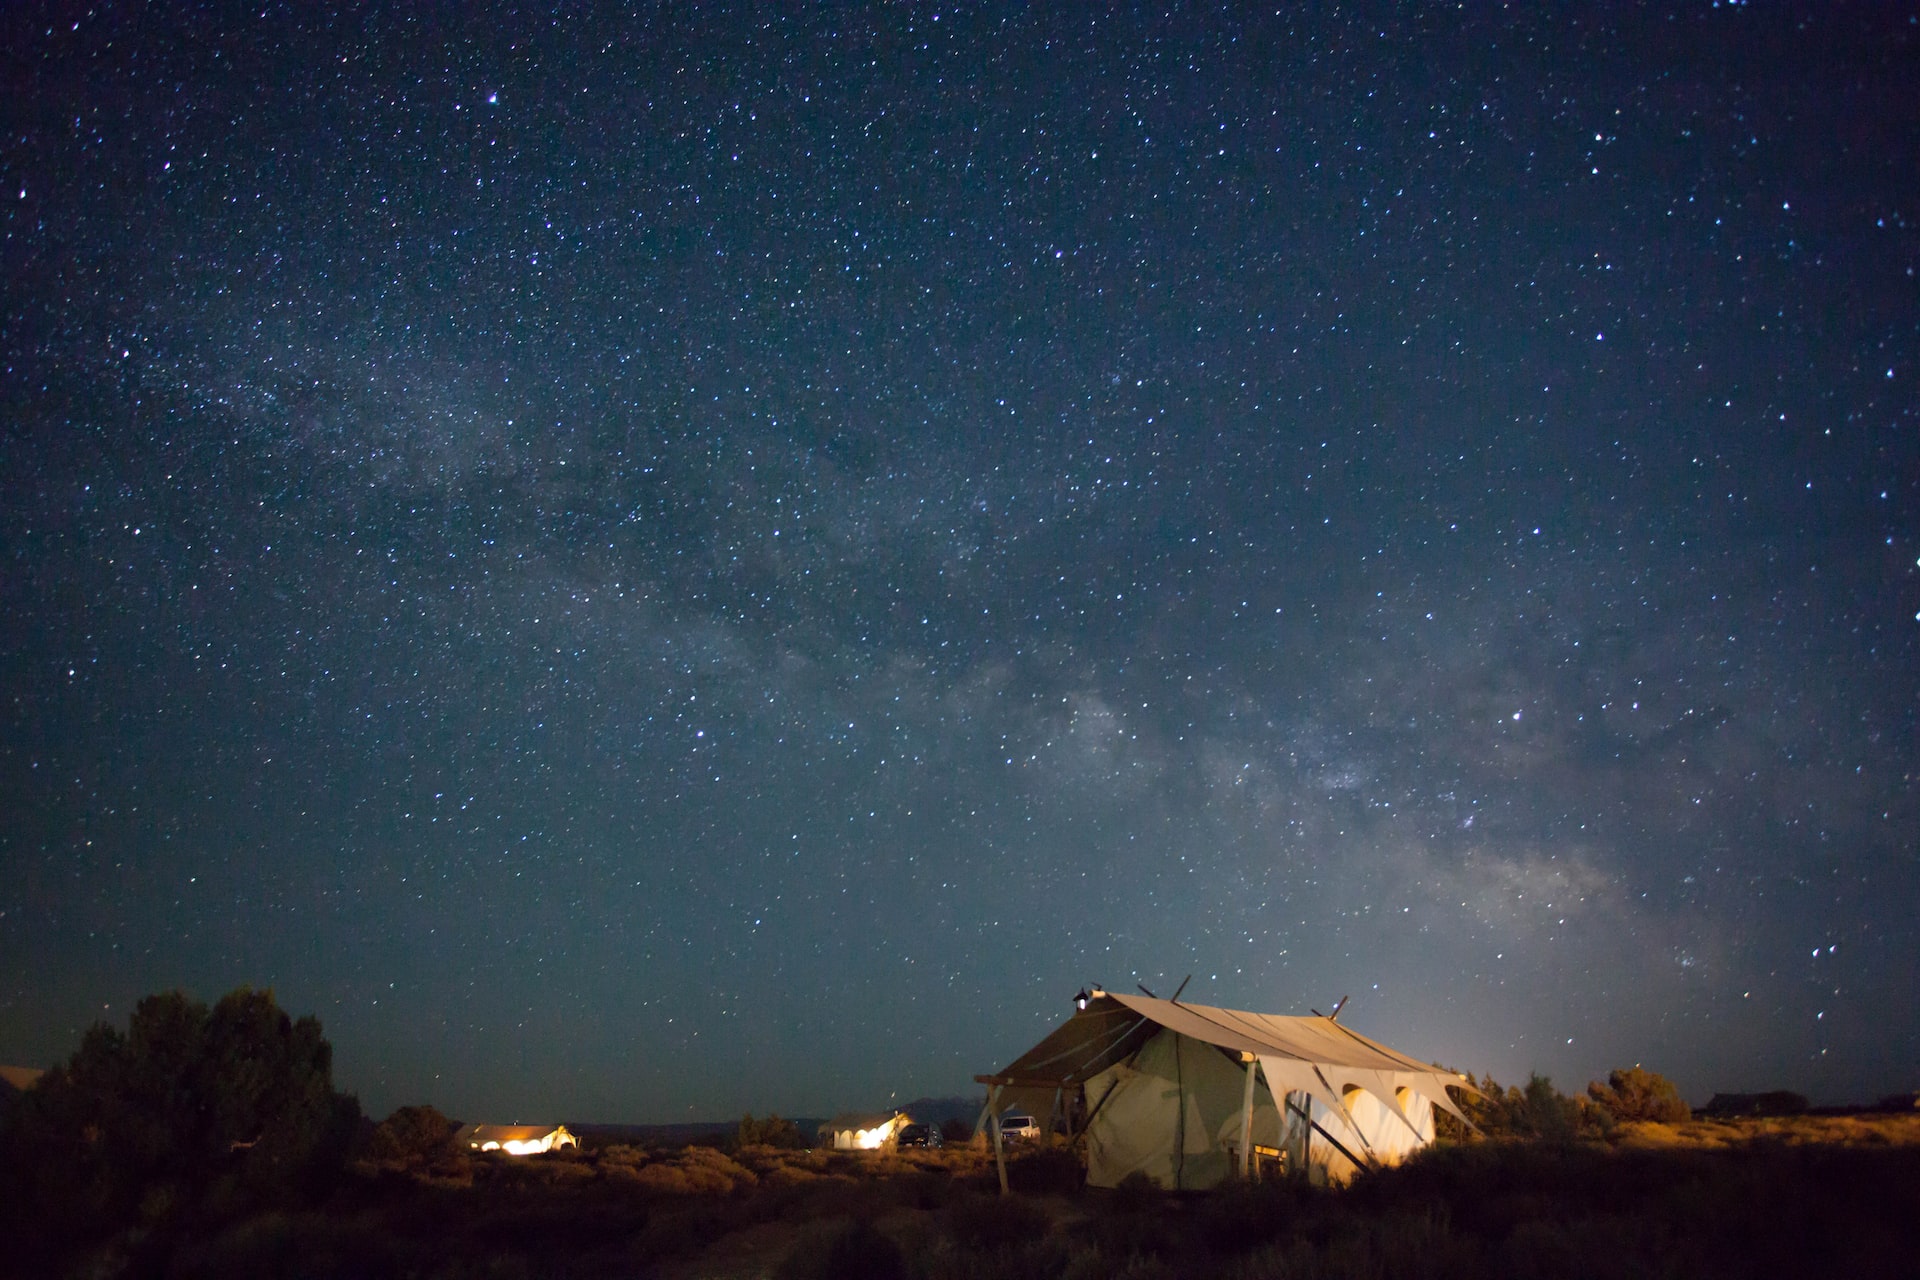 An Under Canvas glamping tent under an overwhelmingly bright night sky full of stars.